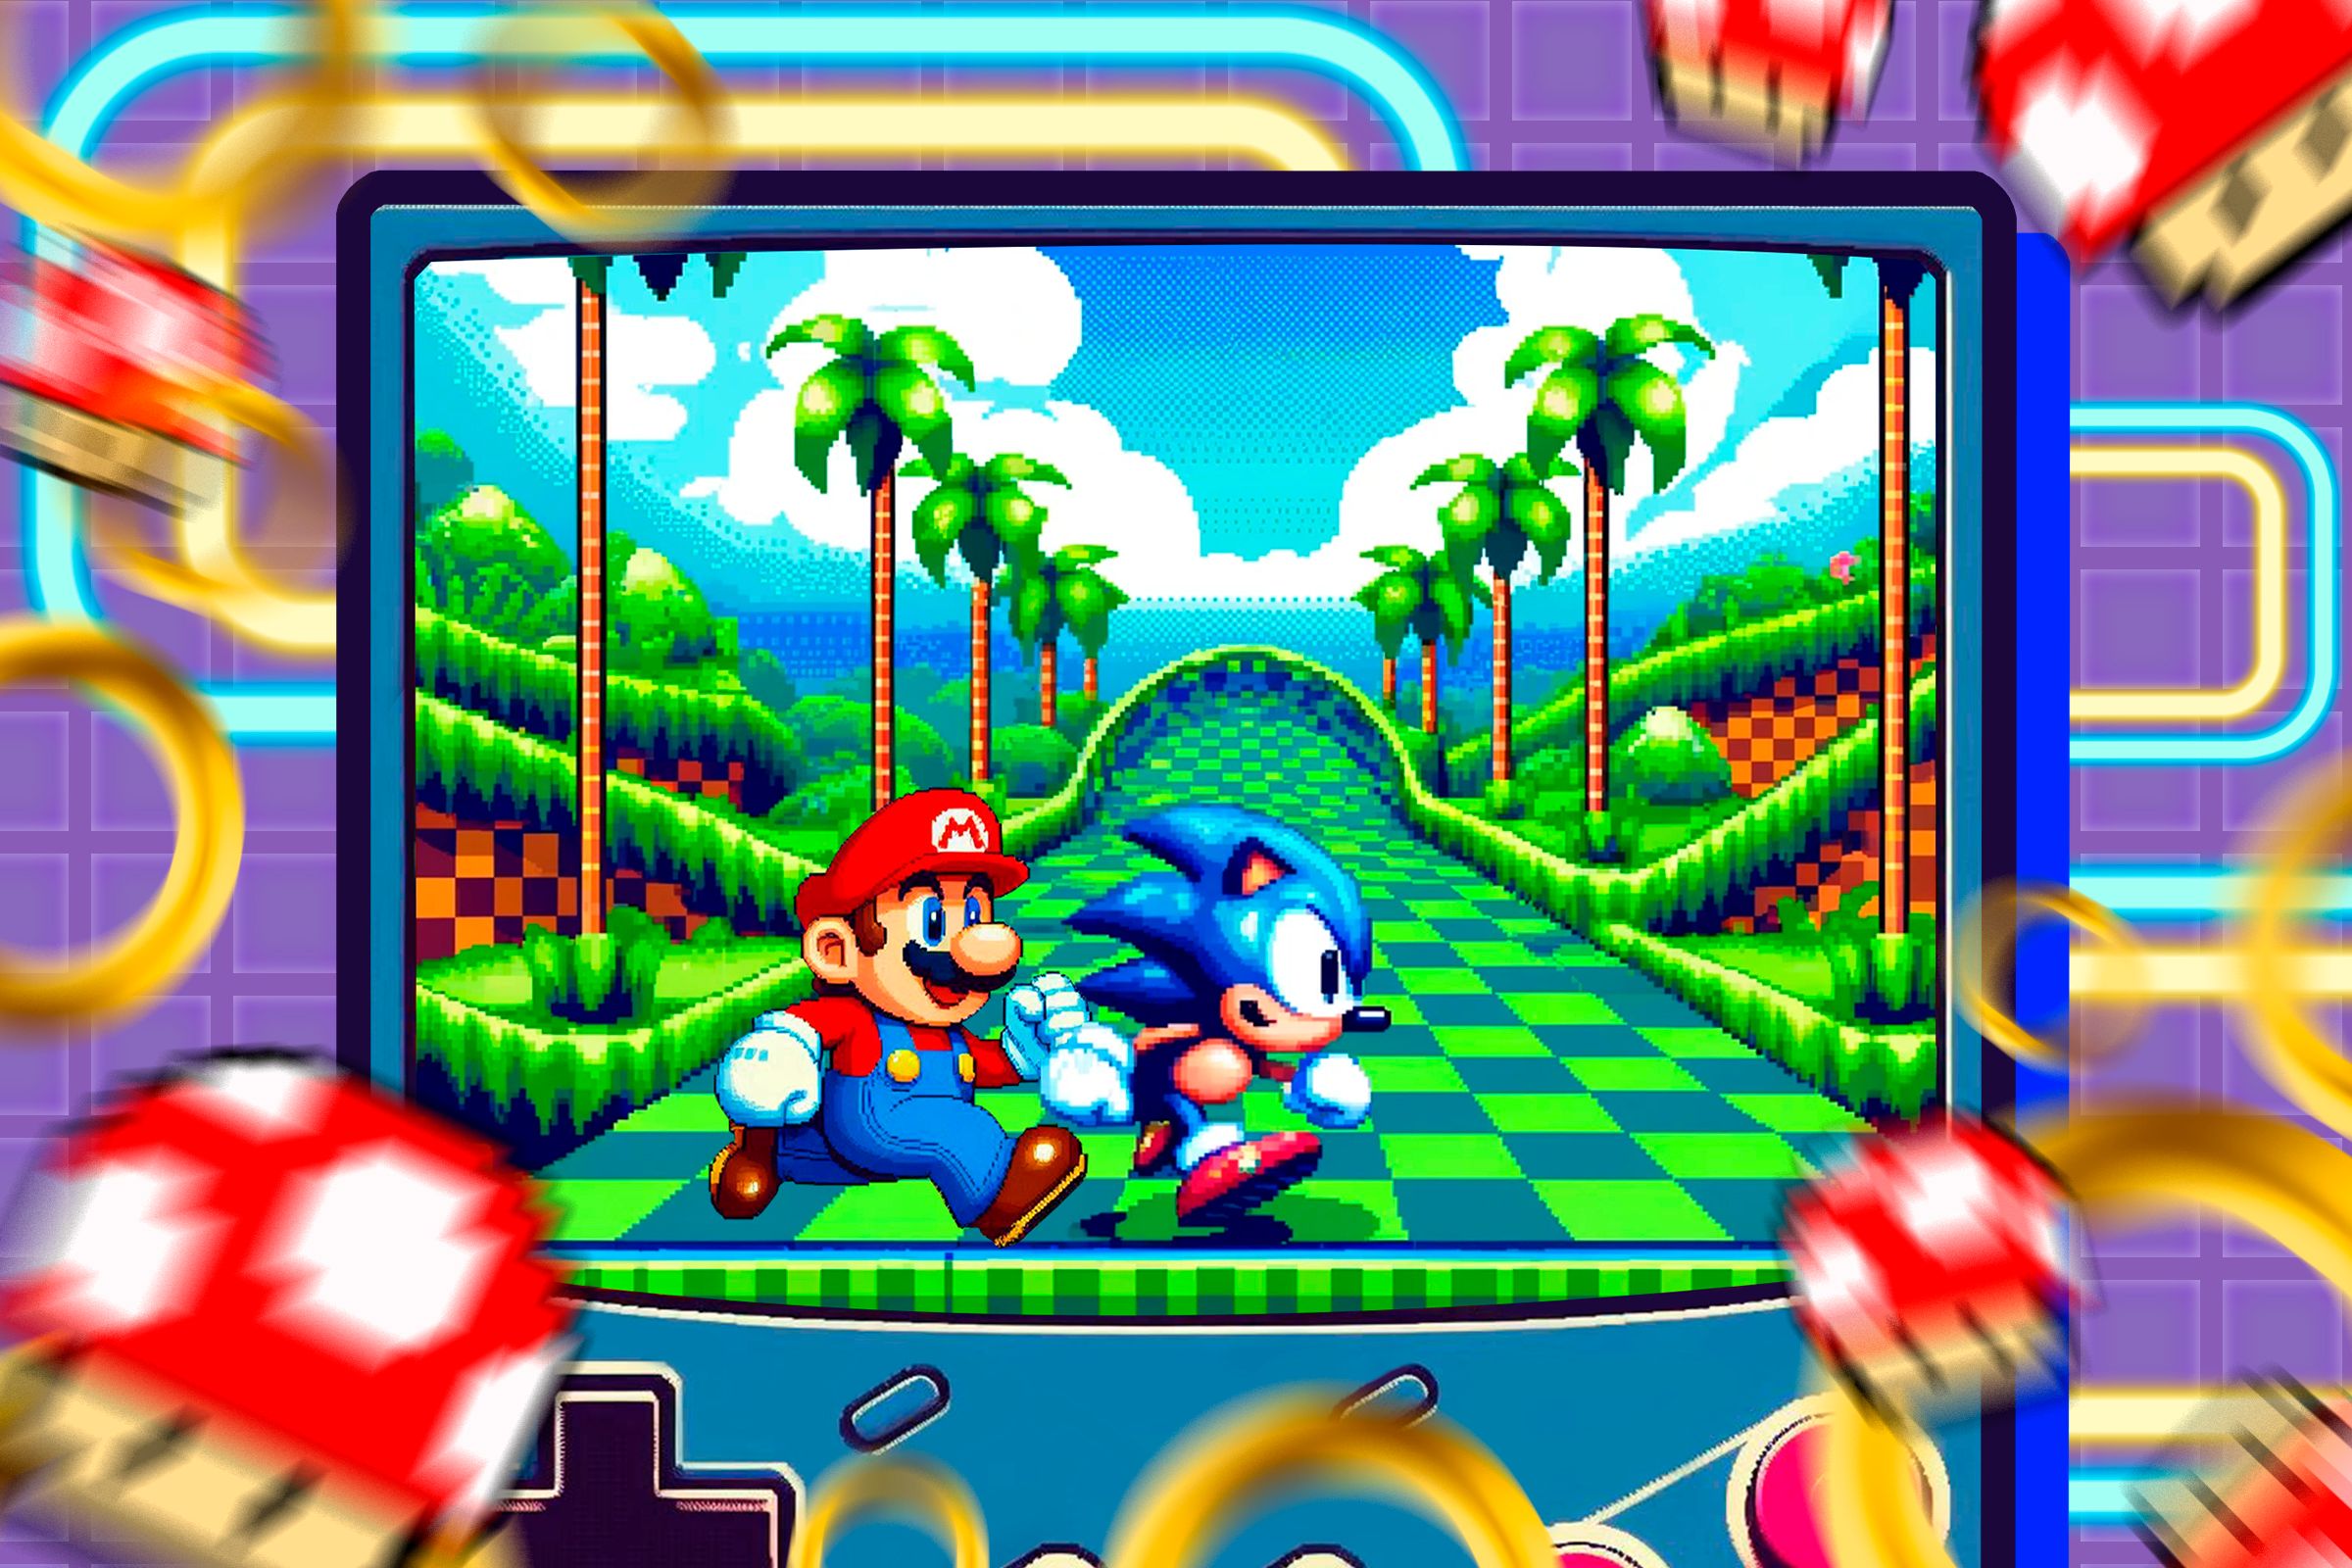 A retro handheld game with Super Mario and Sonic on the screen.